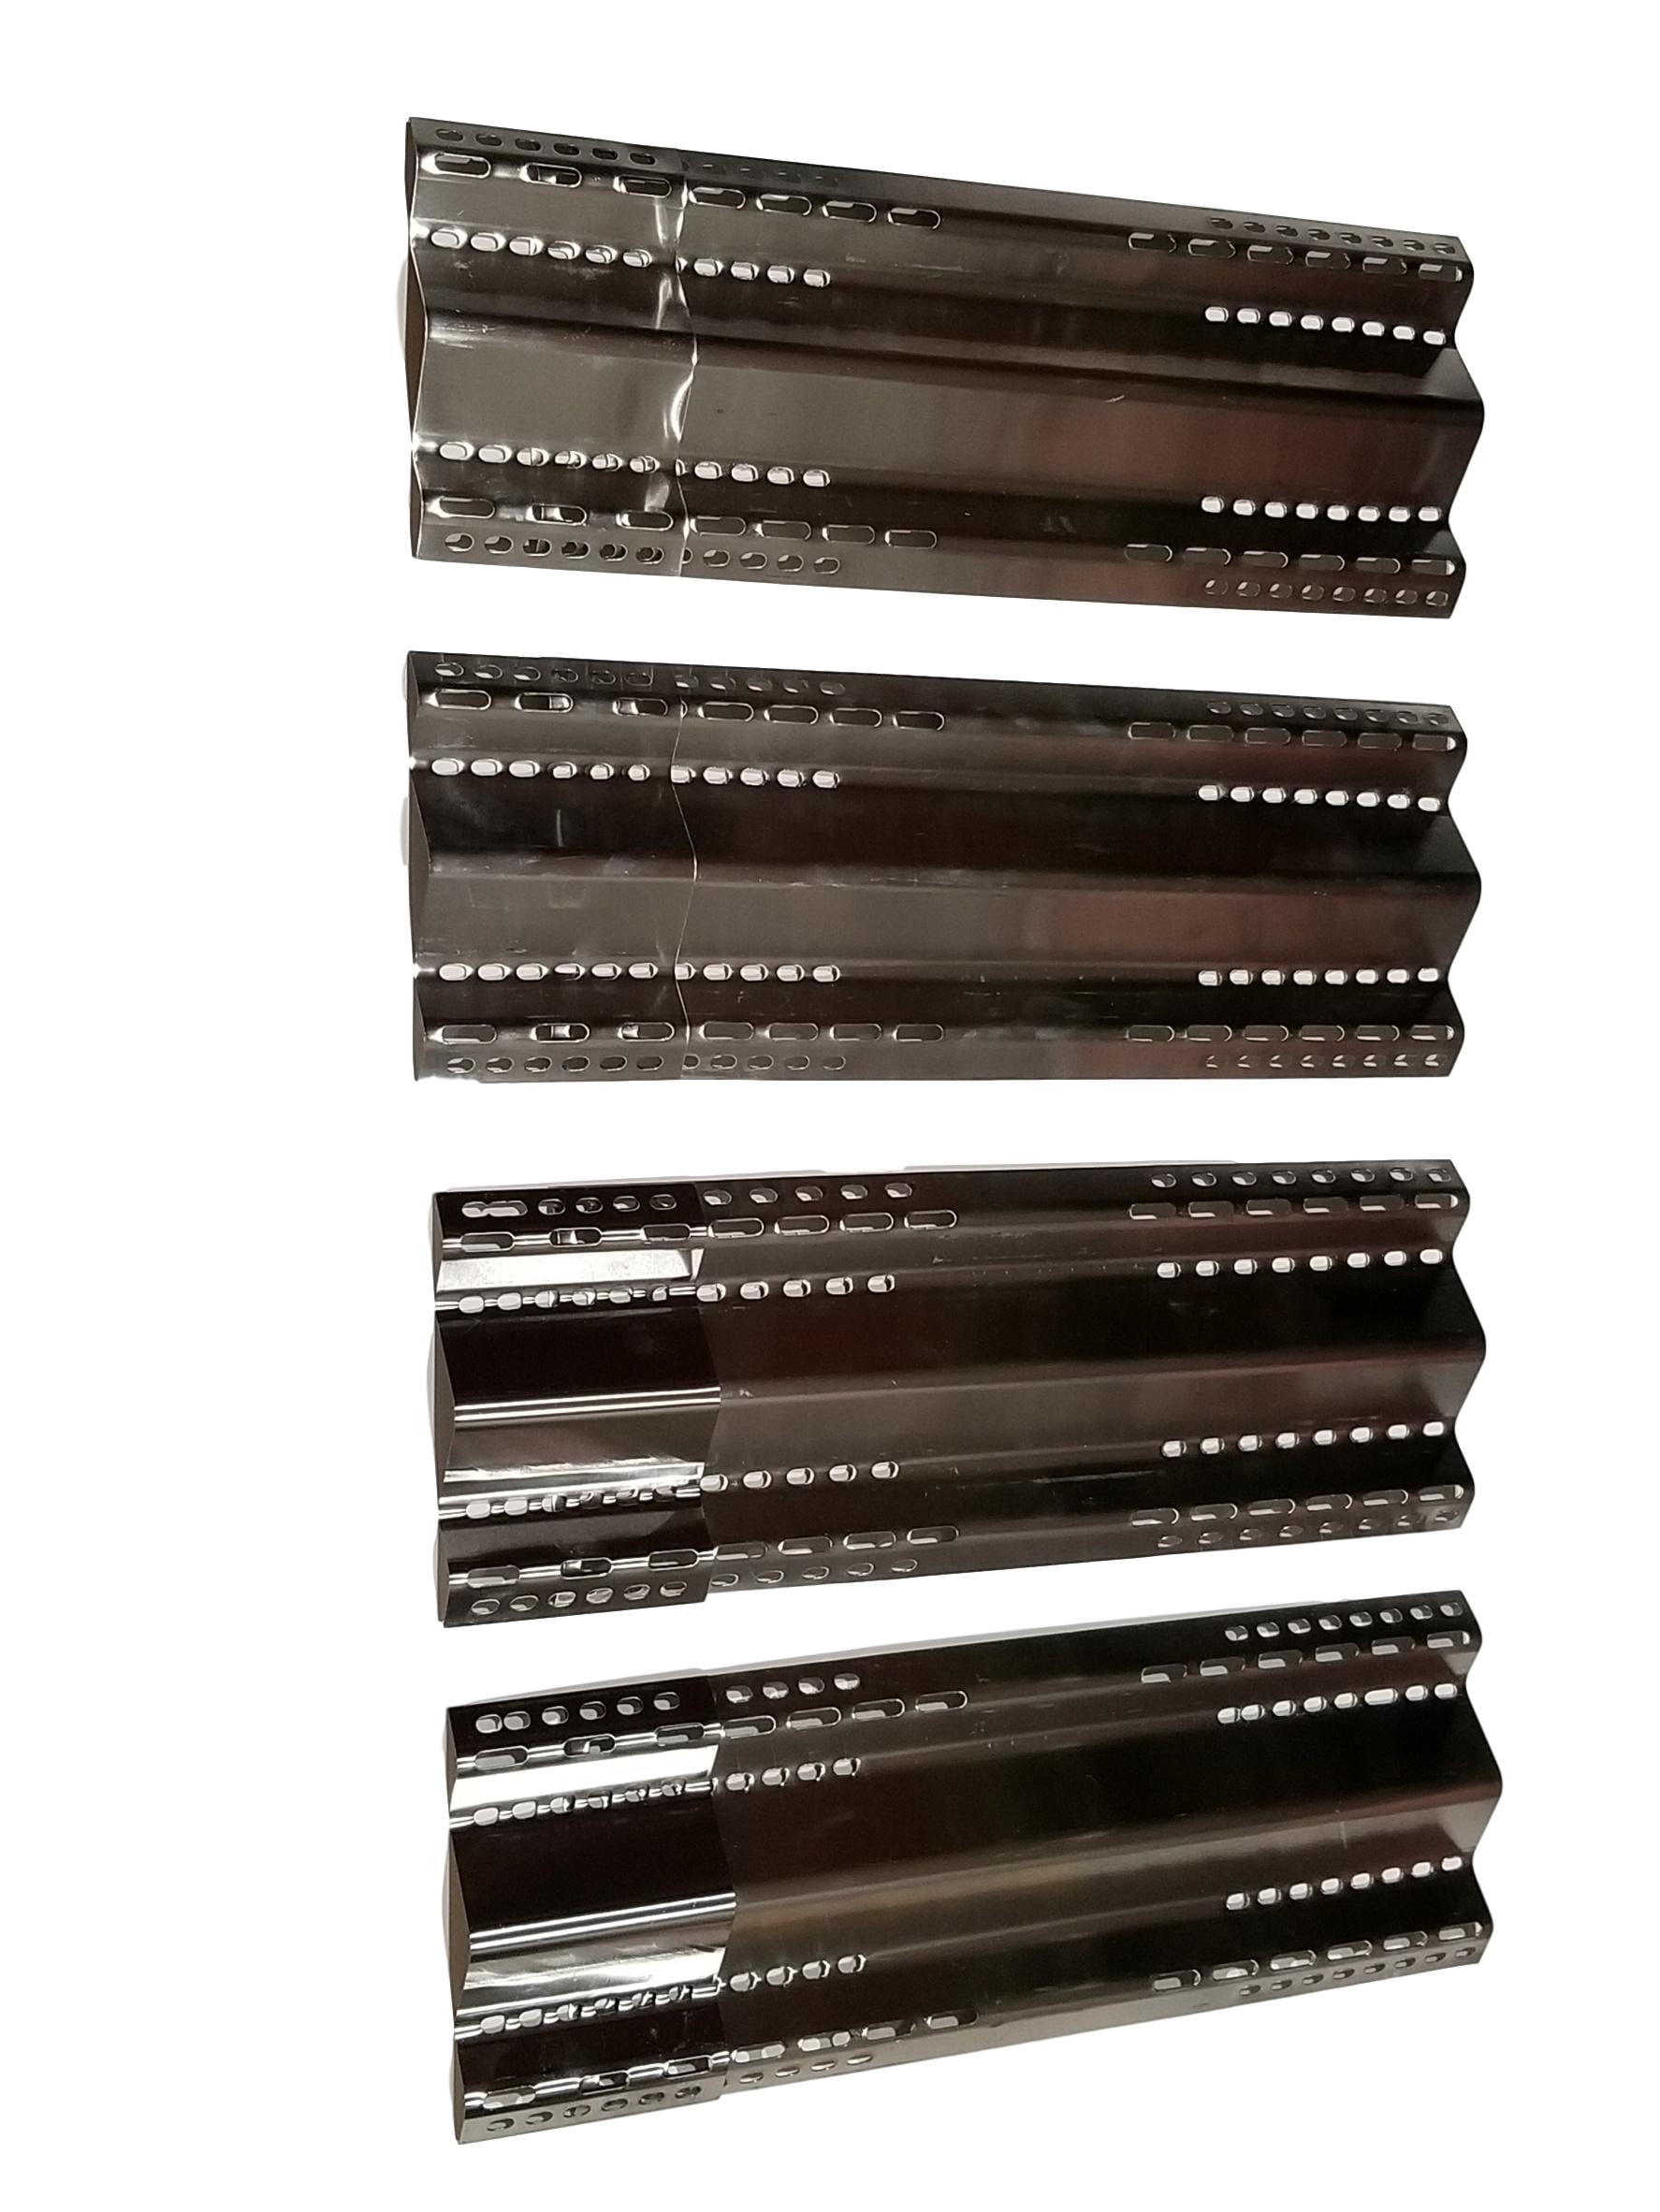 Coleman BBQ Gas Grill Aftermarket Stainless Steel Heat Plate JPX031-3 SS 